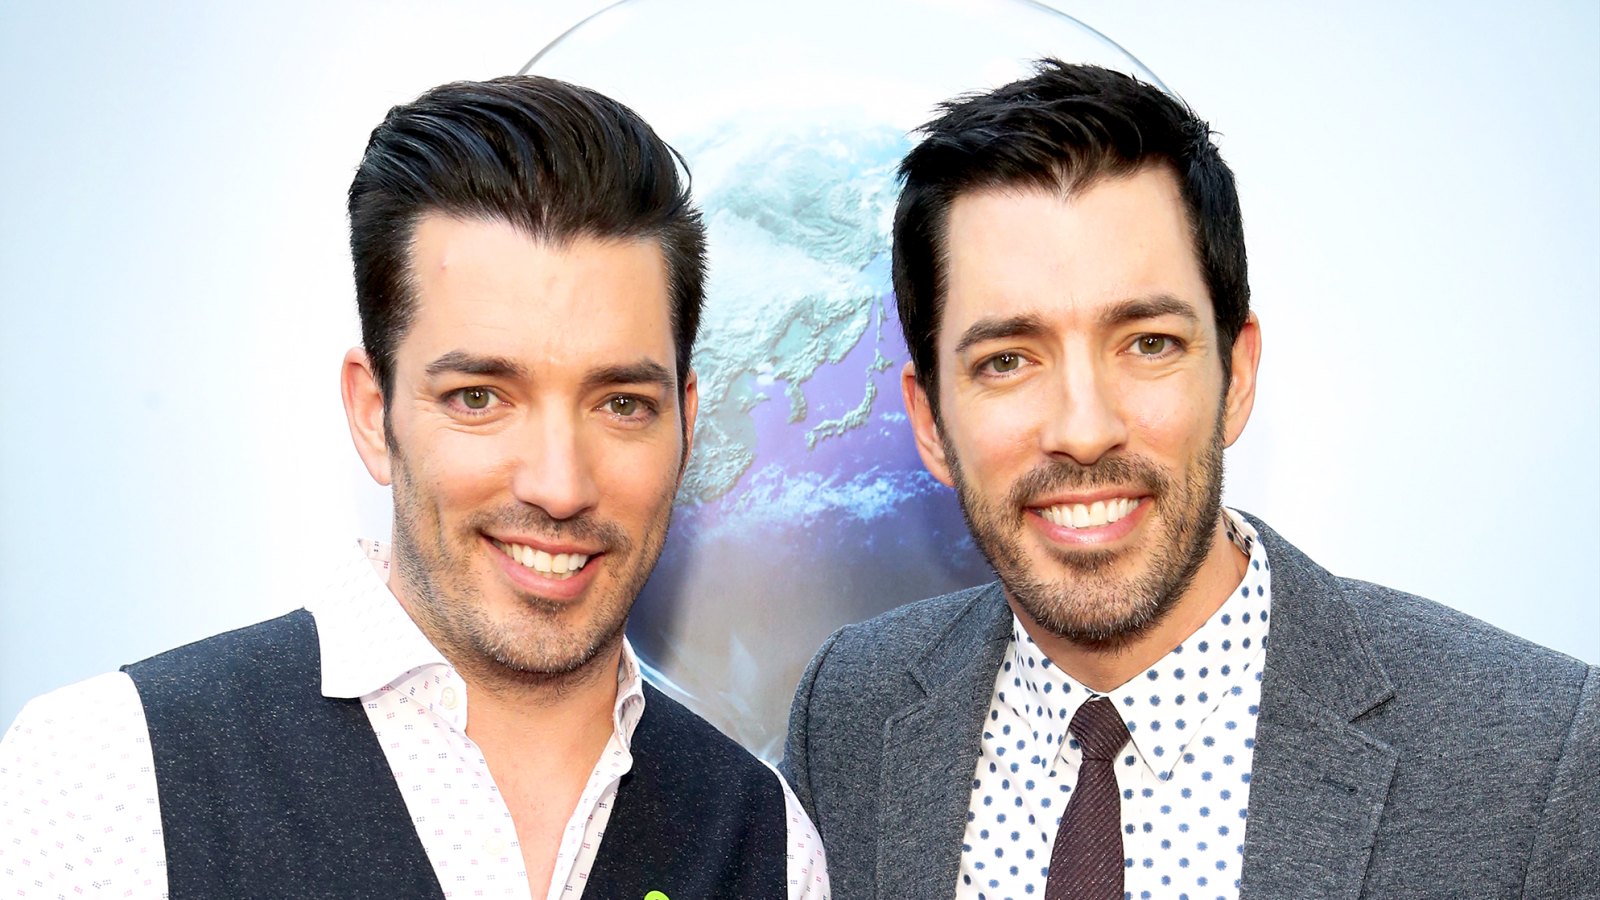 Drew Scott and Jonathan Scott attend a special Los Angeles 2017 screening of 'An Inconvenient Sequel: Truth to Power' at ArcLight Hollywood in Los Angeles, California.